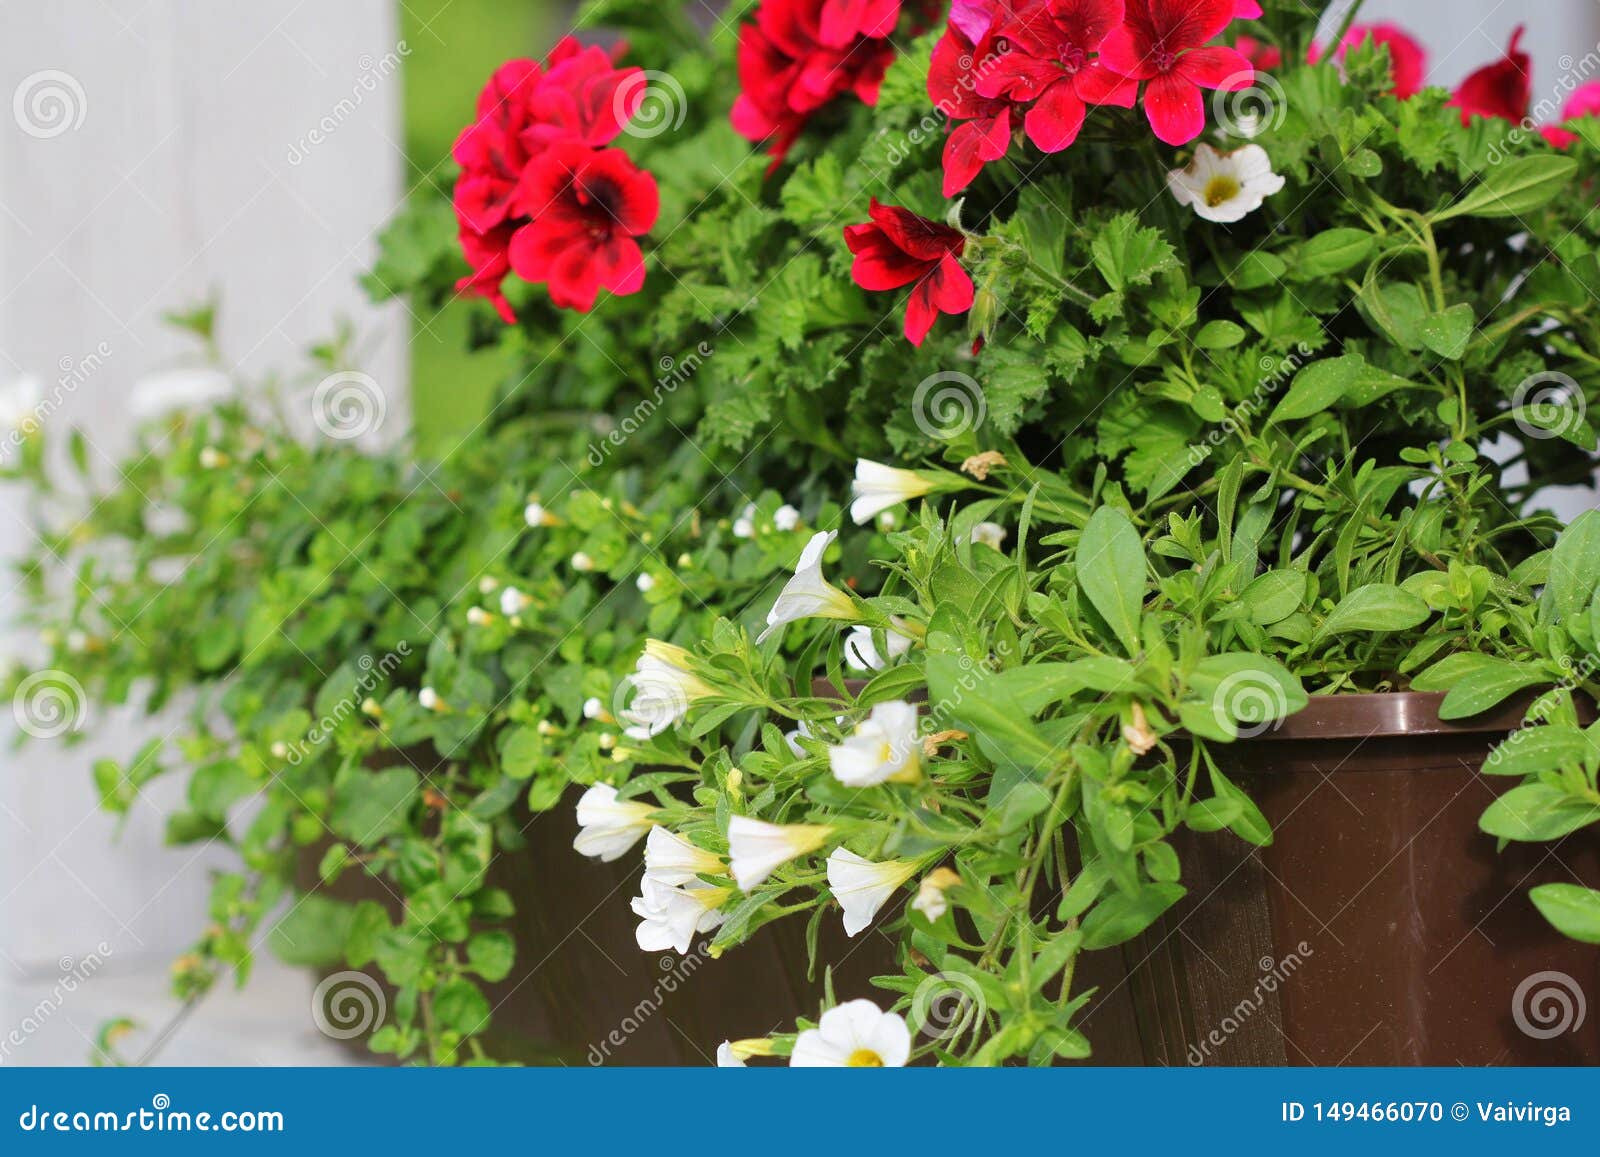 Red And White Flowering Plants In A Flower Box Stock Photo Image Of Architecture Closeup 149466070